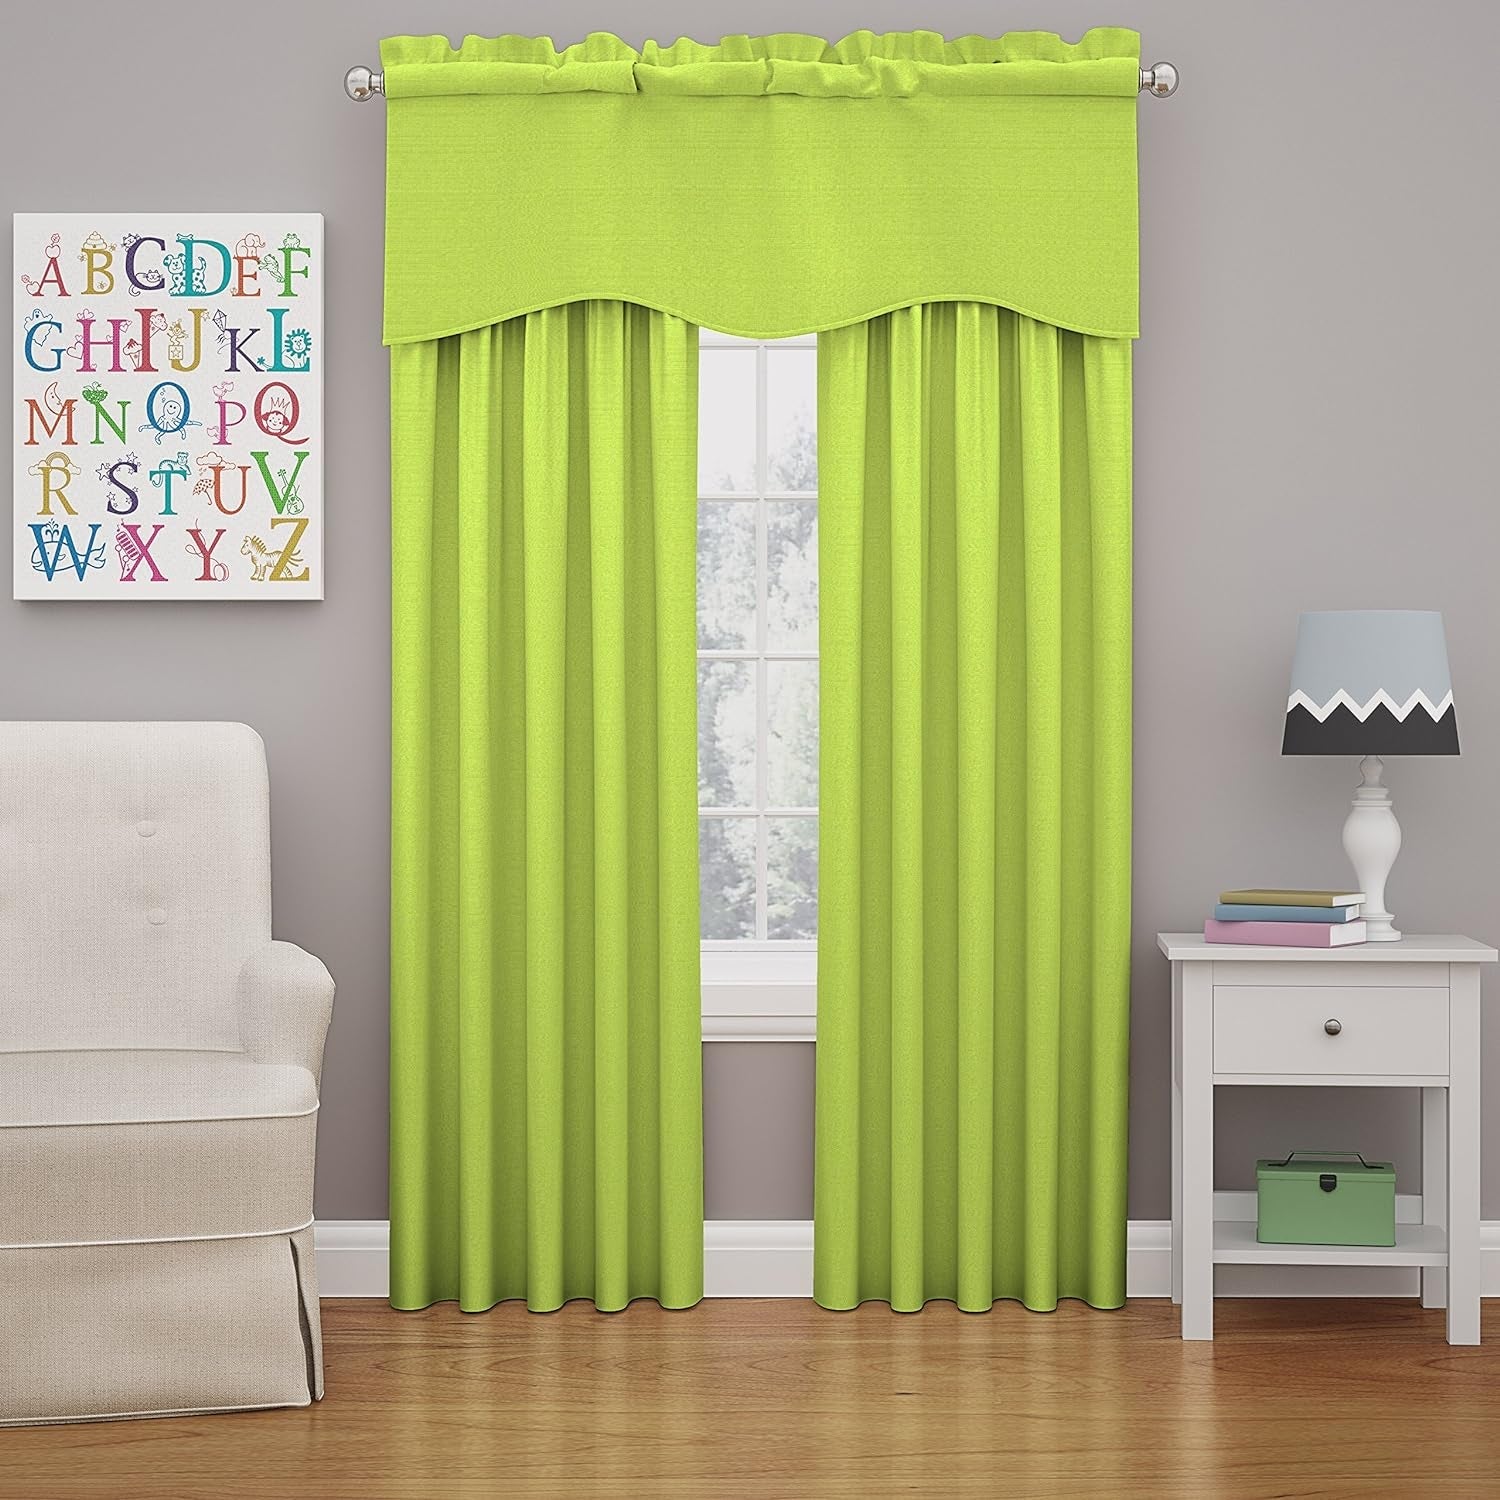 ECLIPSE Kendall Modern Scalloped Valance Rod Pocket Window Curtain for Kitchen or Bathroom, 42" X 18", Lime